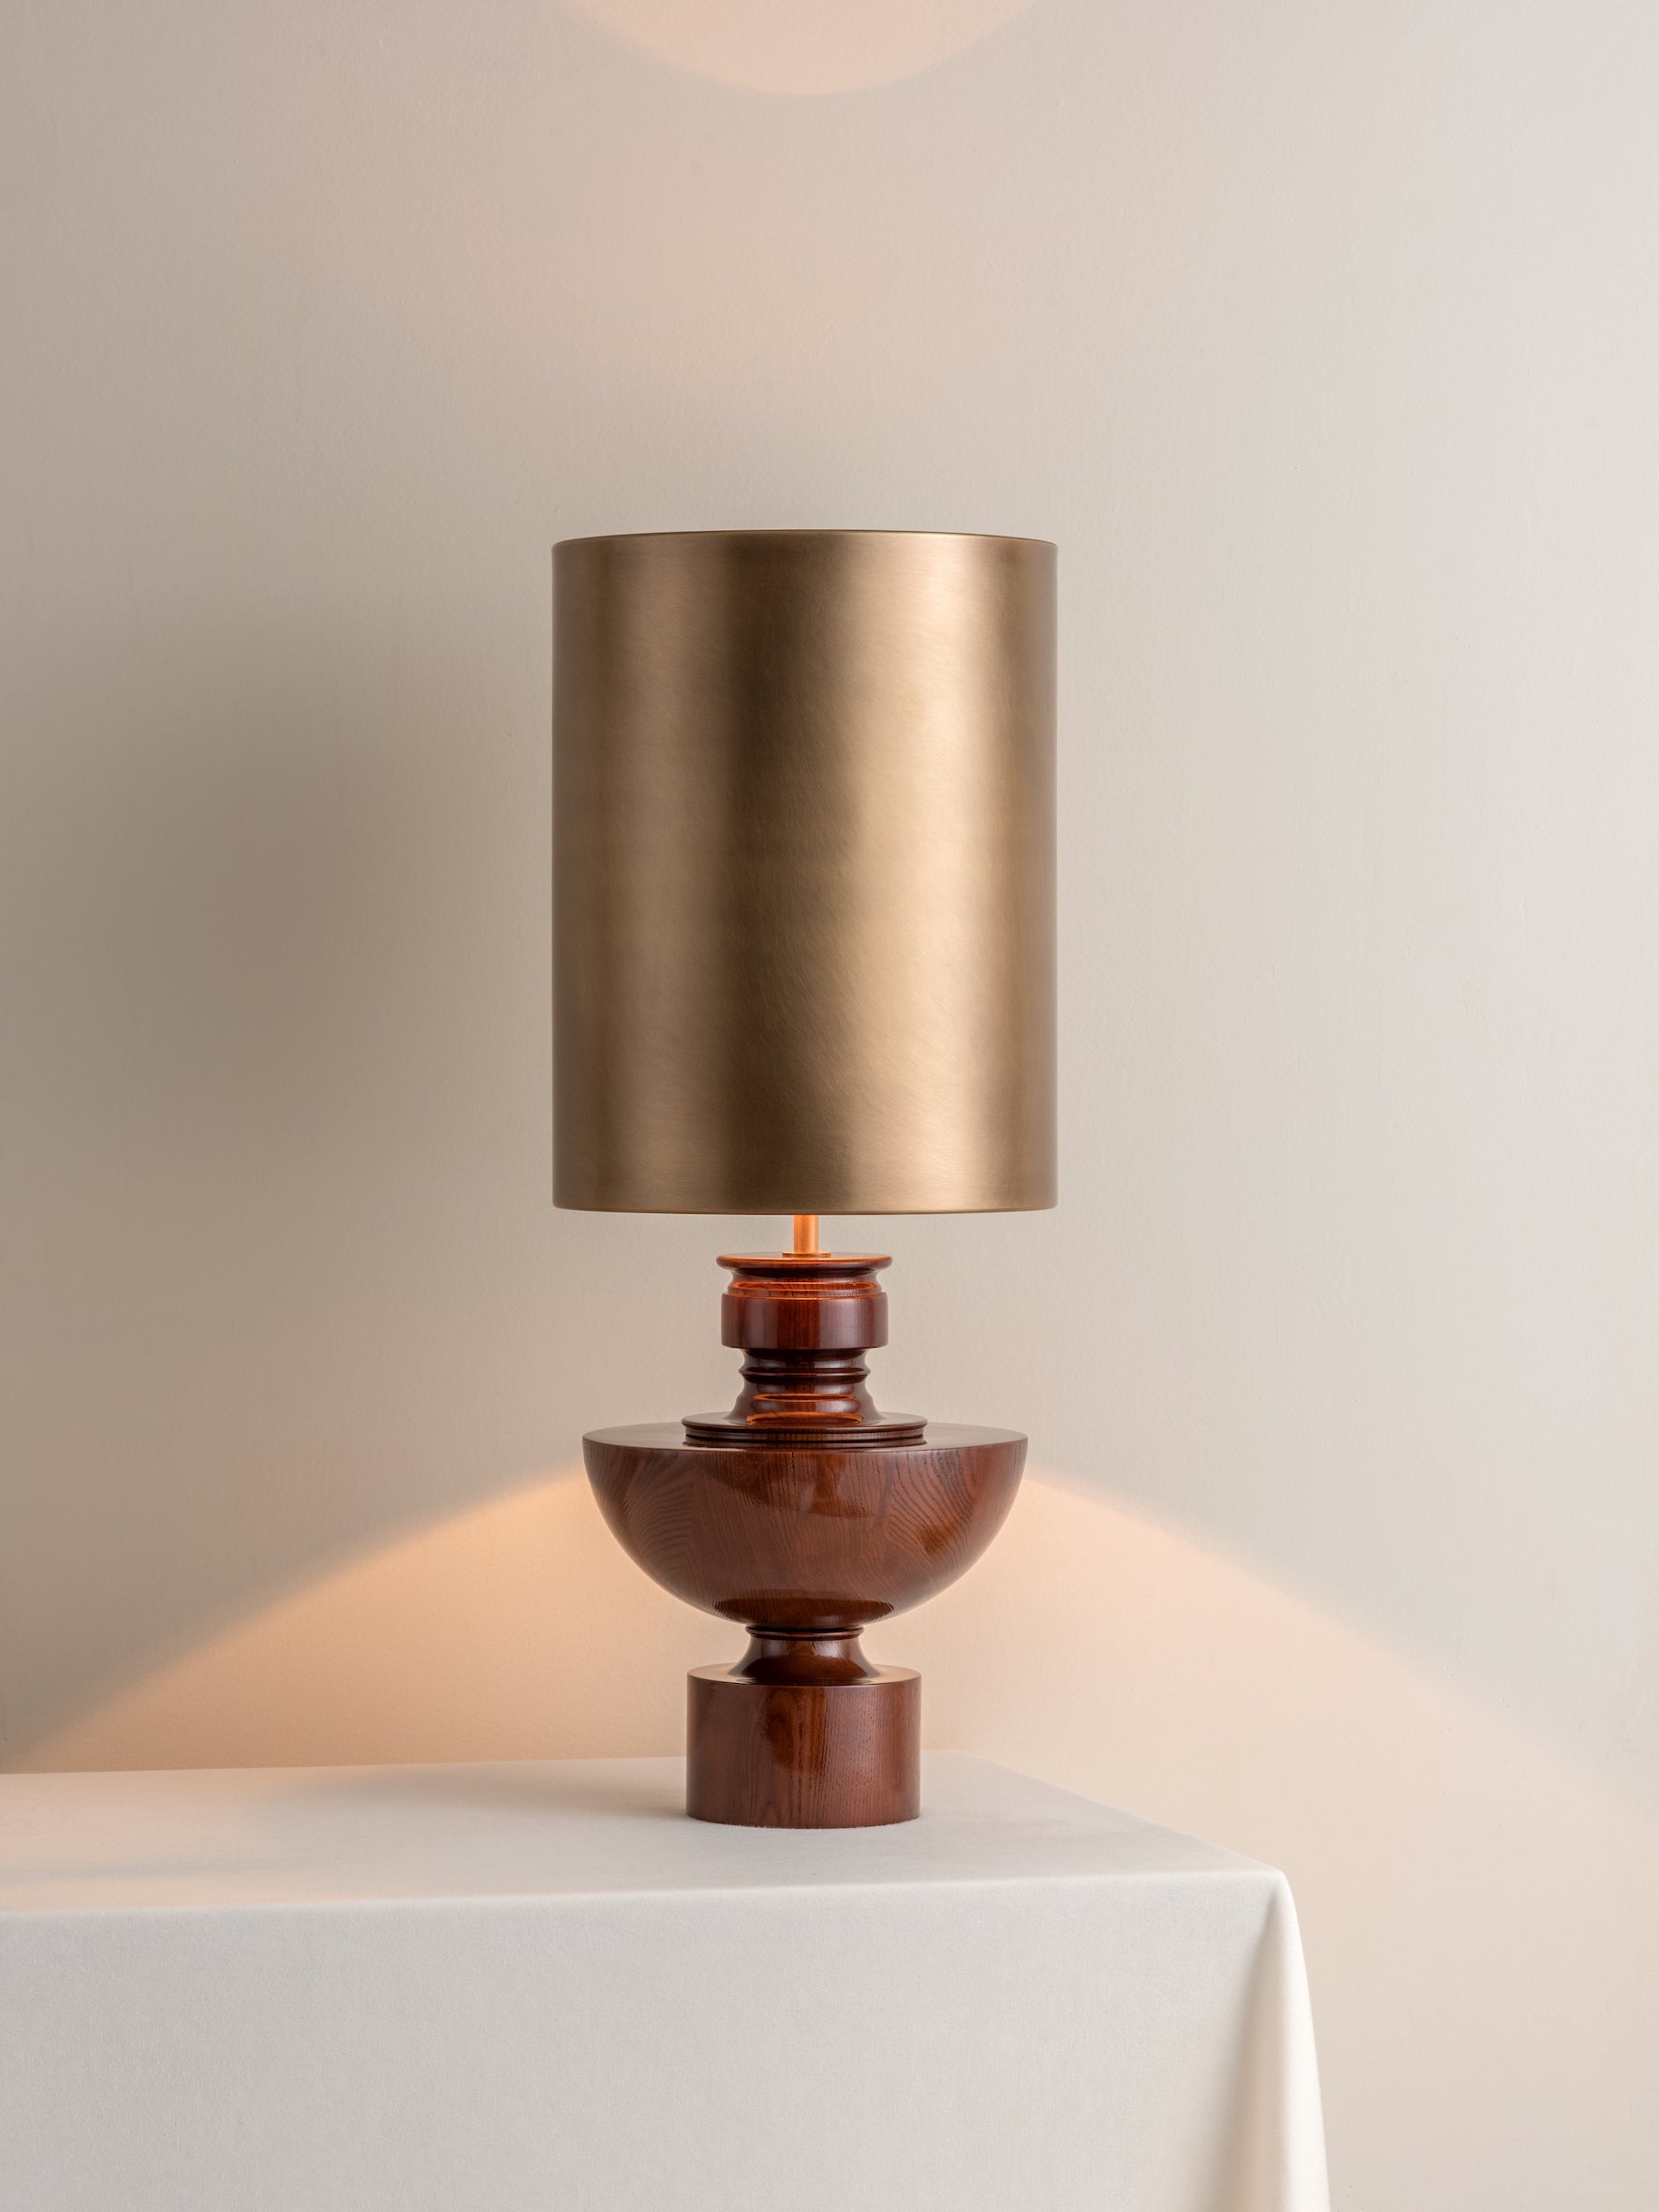 Editions spun wood lamp with + aged brass shade | Table Lamp | Lights & Lamps Inc | Modern Affordable Designer Lighting | USA